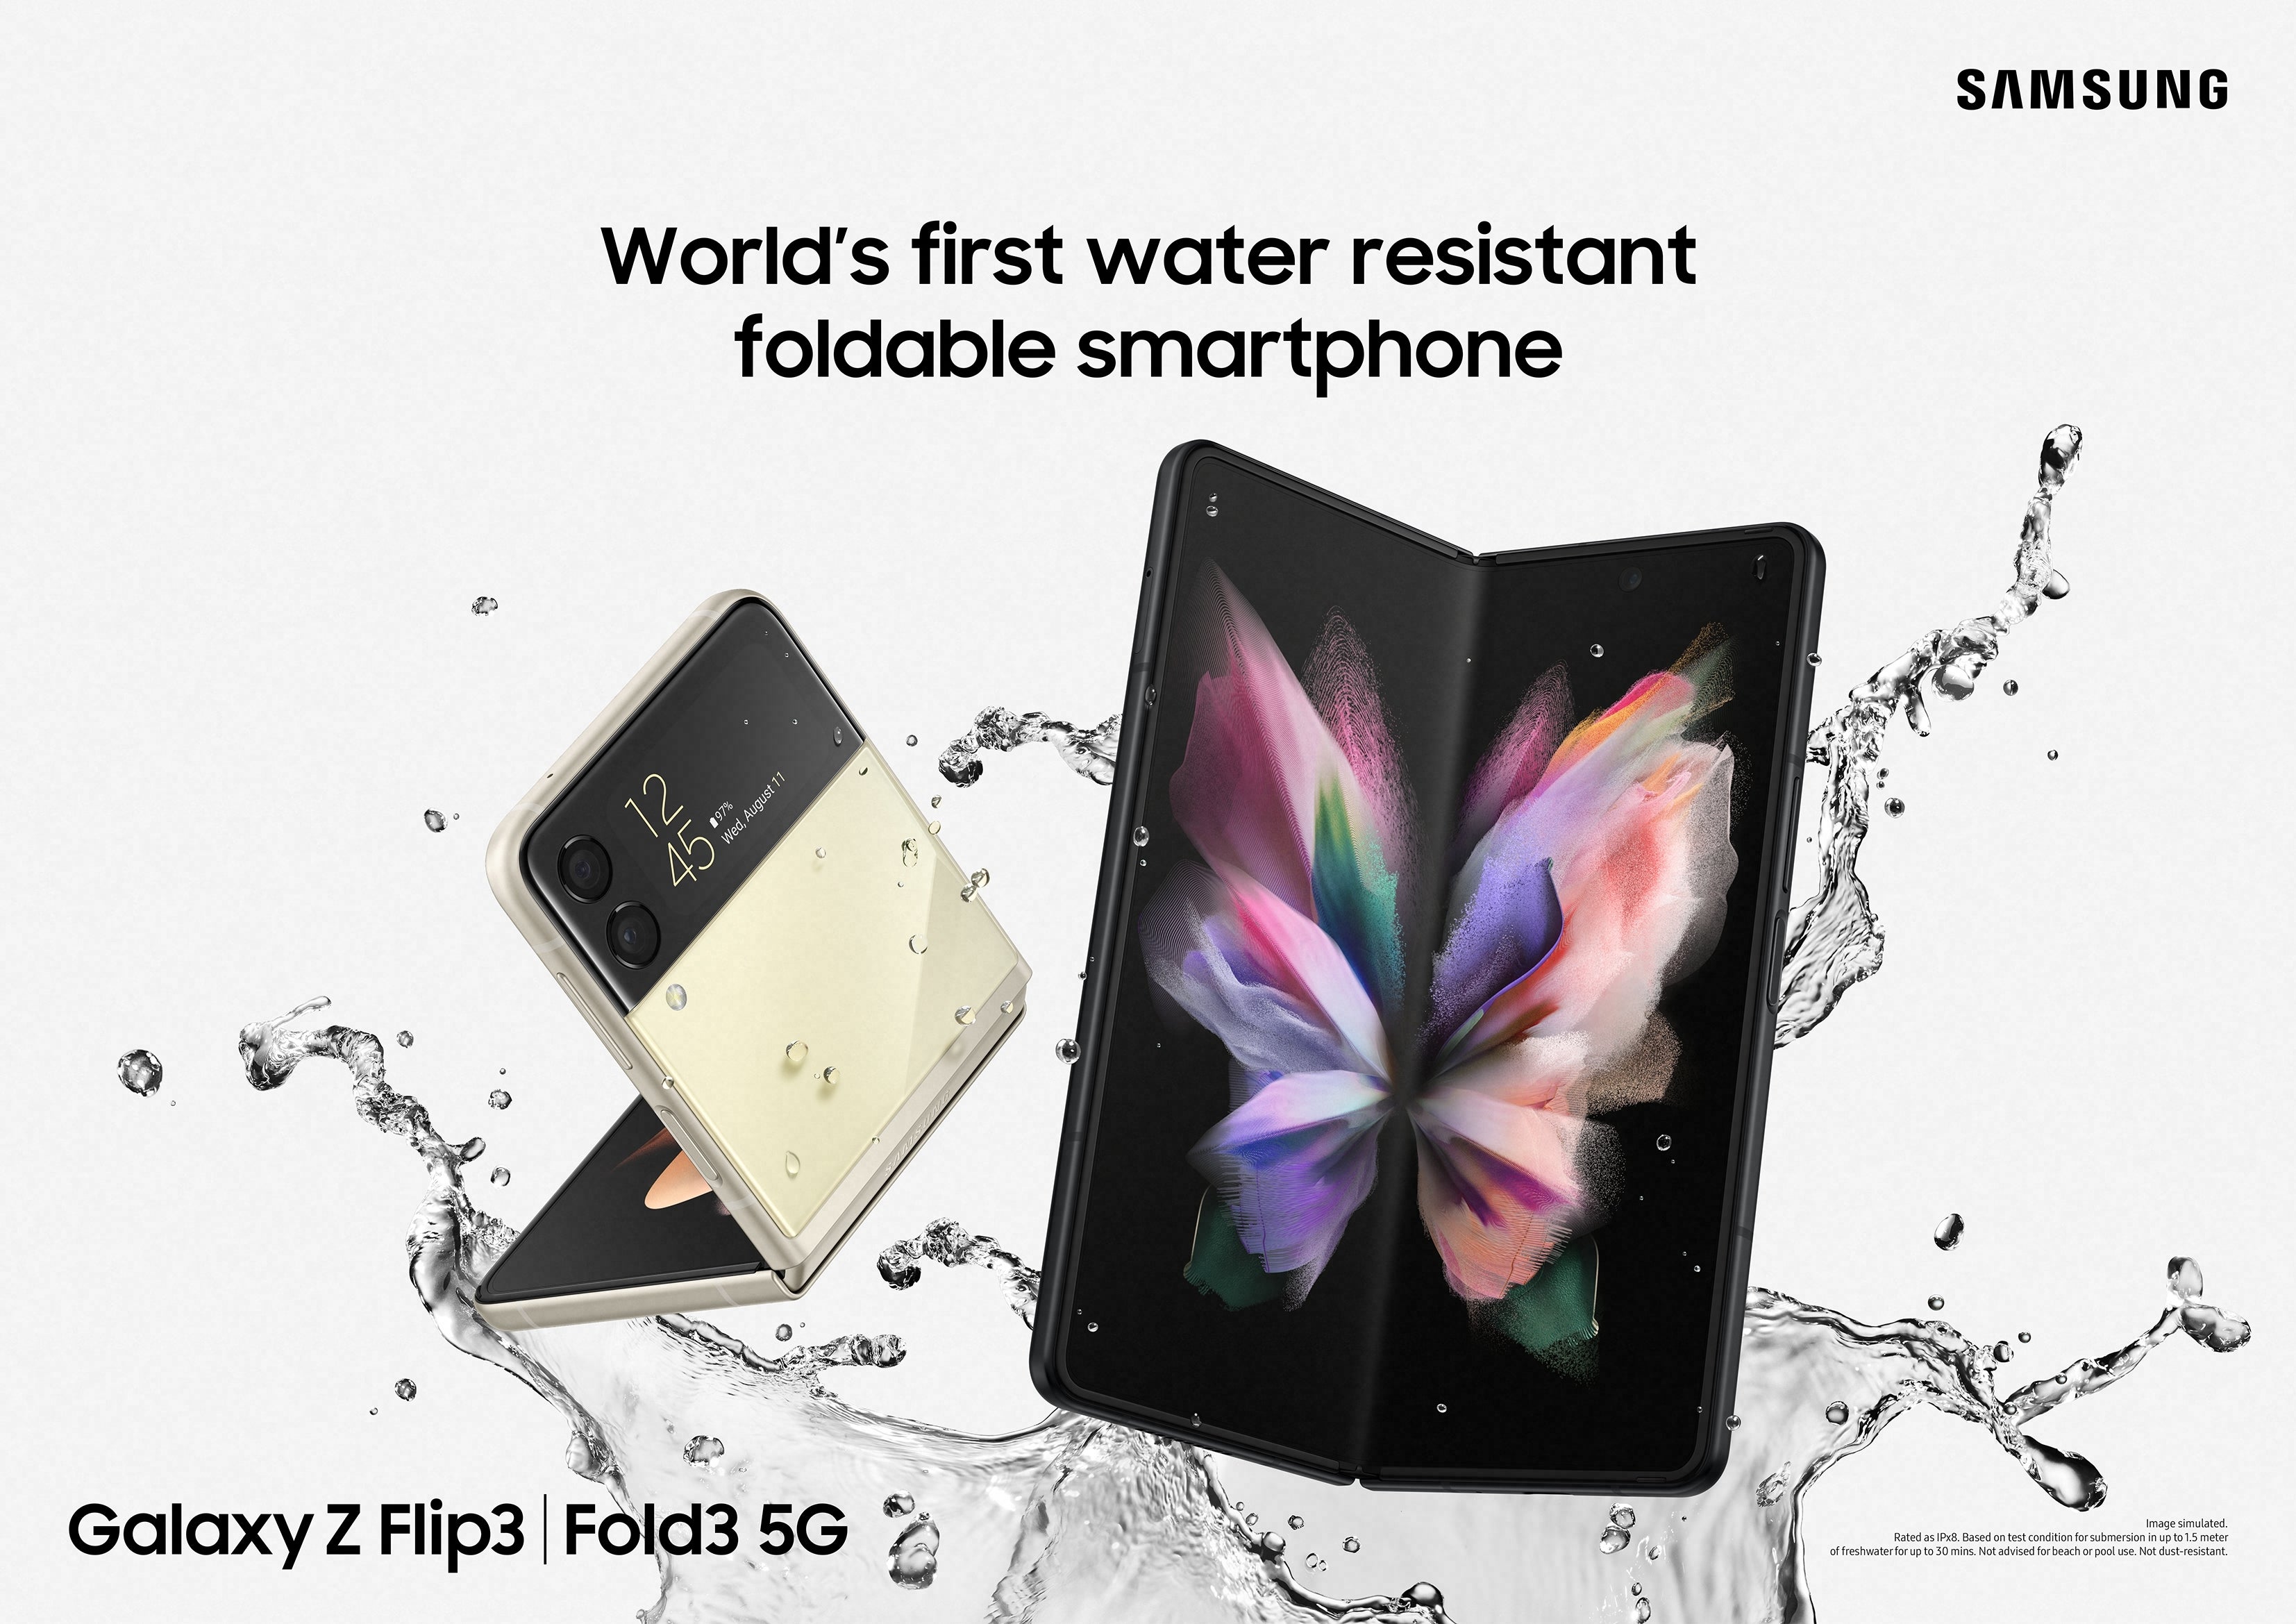 The Galaxy Z Fold 3 and the Galaxy Z Flip 3 in a promotional image - Аre the Samsung Galaxy Z Fold 3 and Z Flip 3 waterproof?